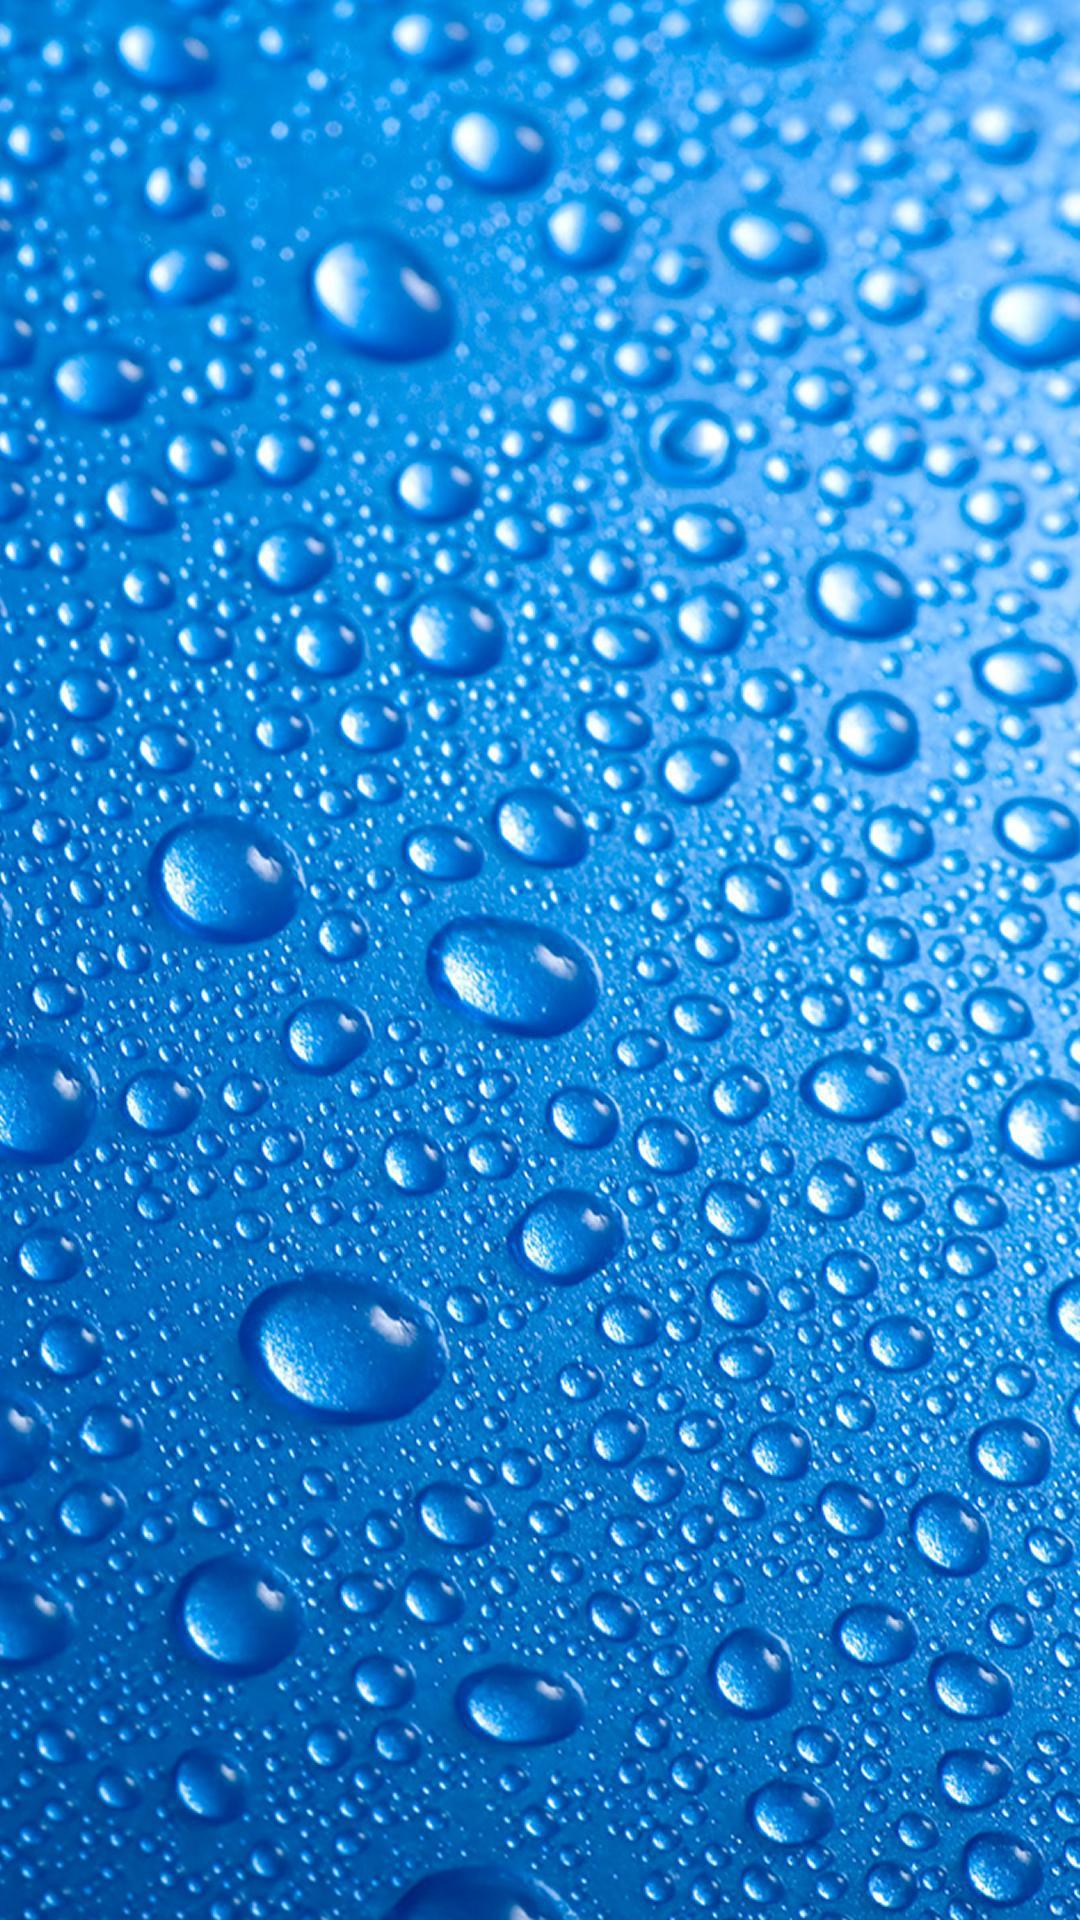 Water droplets Wallpaper 4K Black background Photography 5488